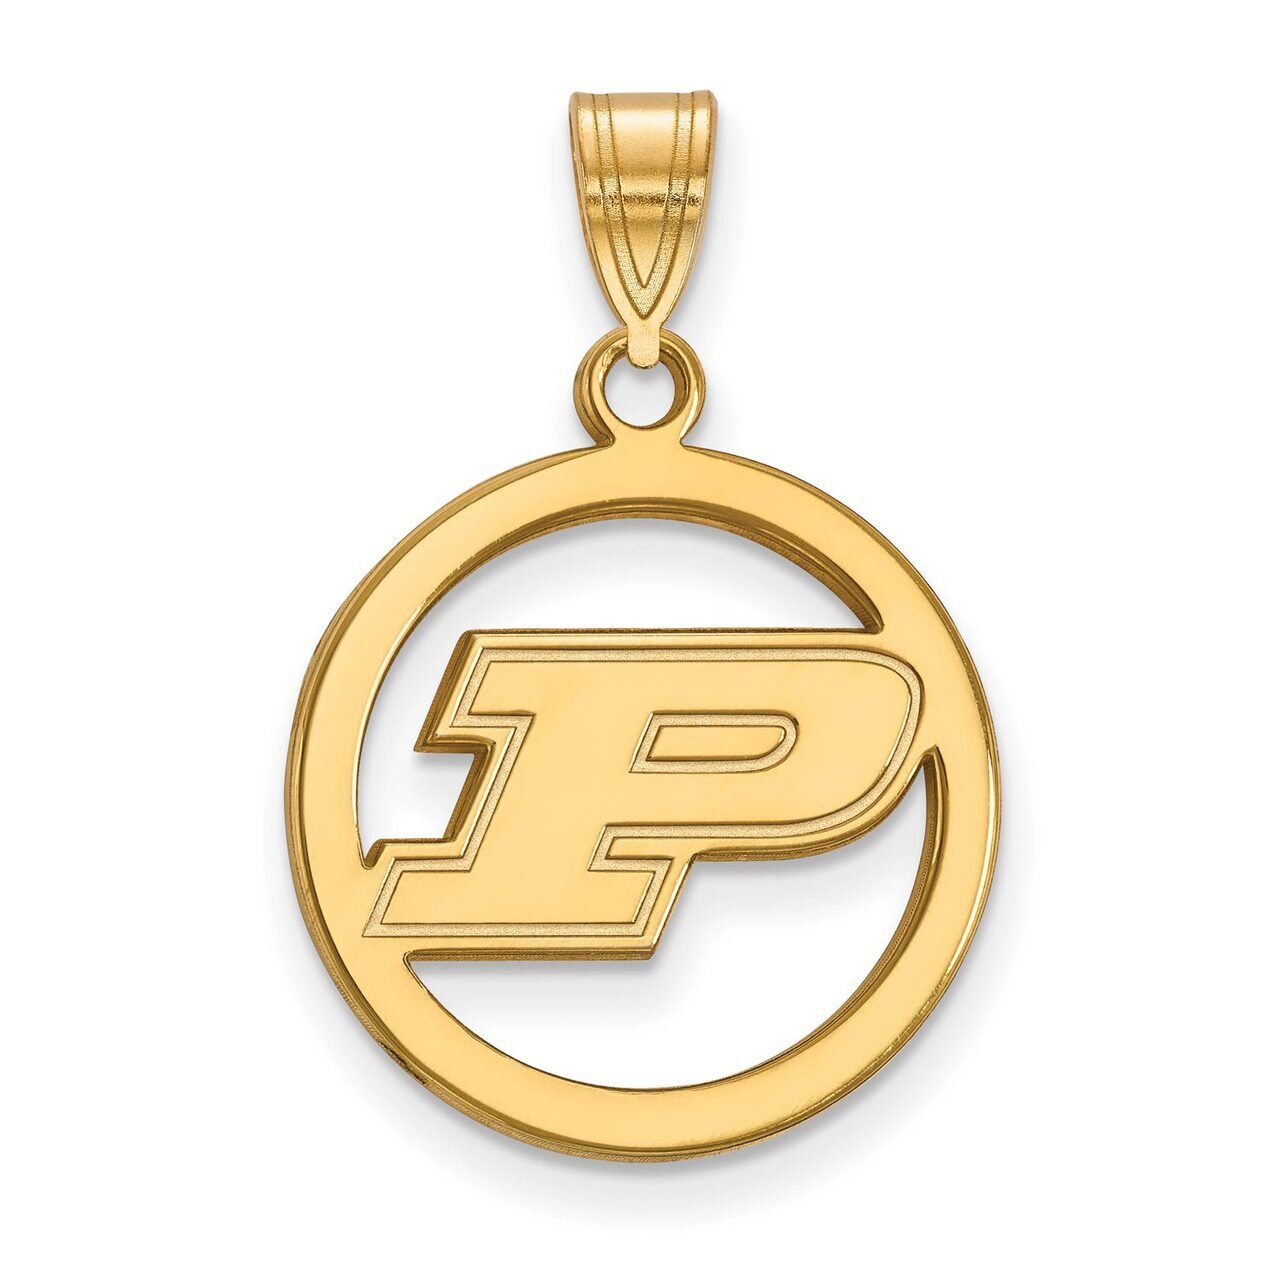 Purdue Sm Pendant in Circle Gold-plated Silver GP028PU